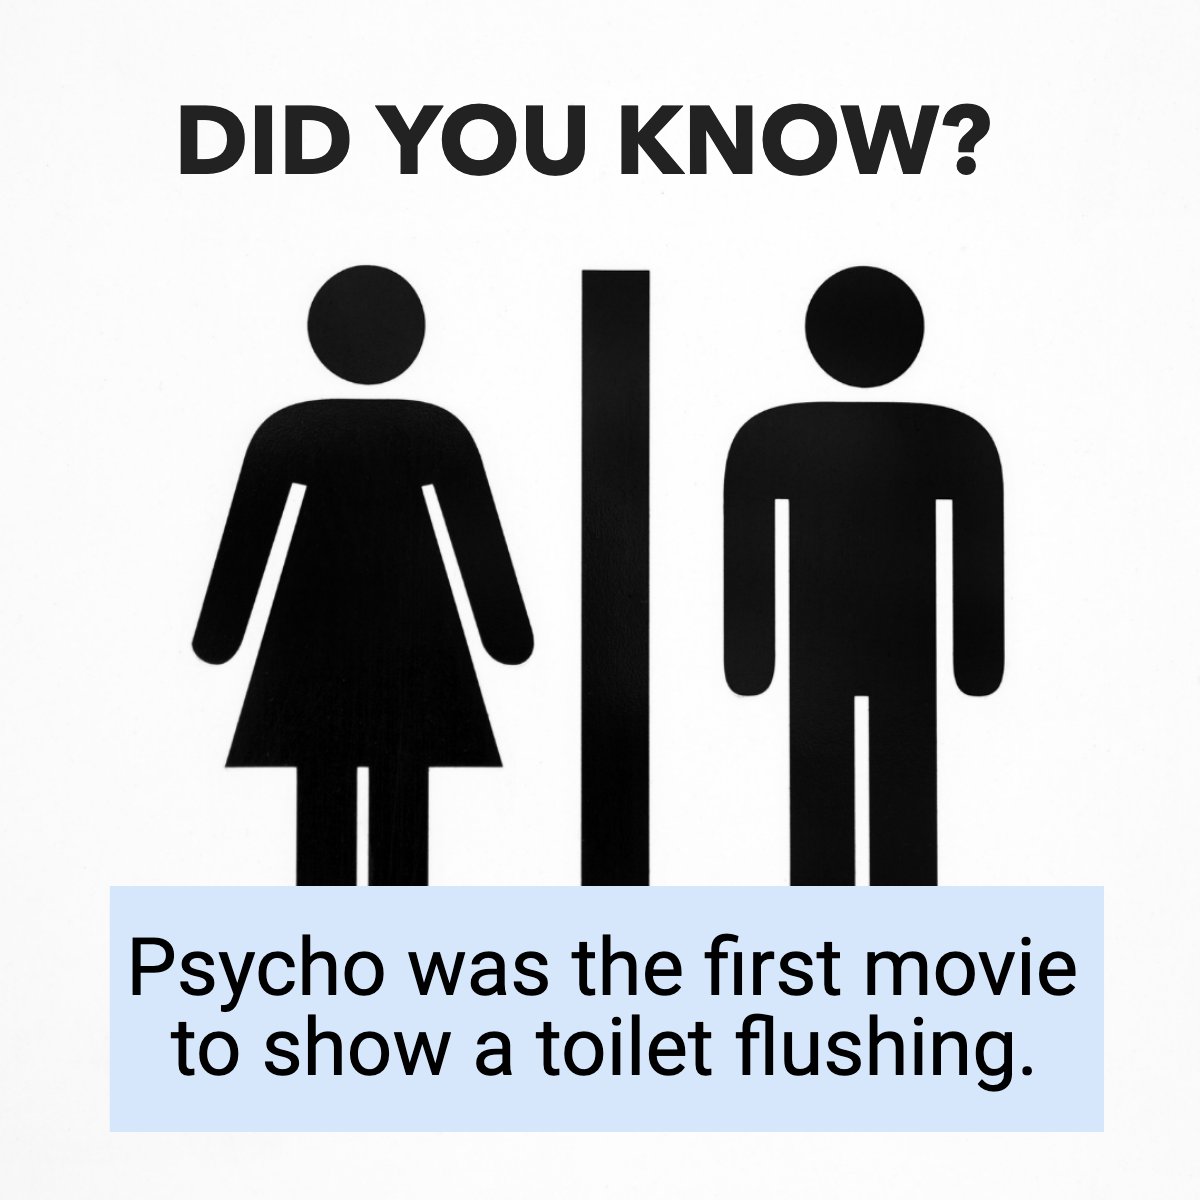 Psycho is an iconic movie that is still considered and viewed as a classic. 

But did you know?

Psycho was the first movie to show a toilet flushing. 

#Buyingahome #Sellingahome #Wisconsinrealestate